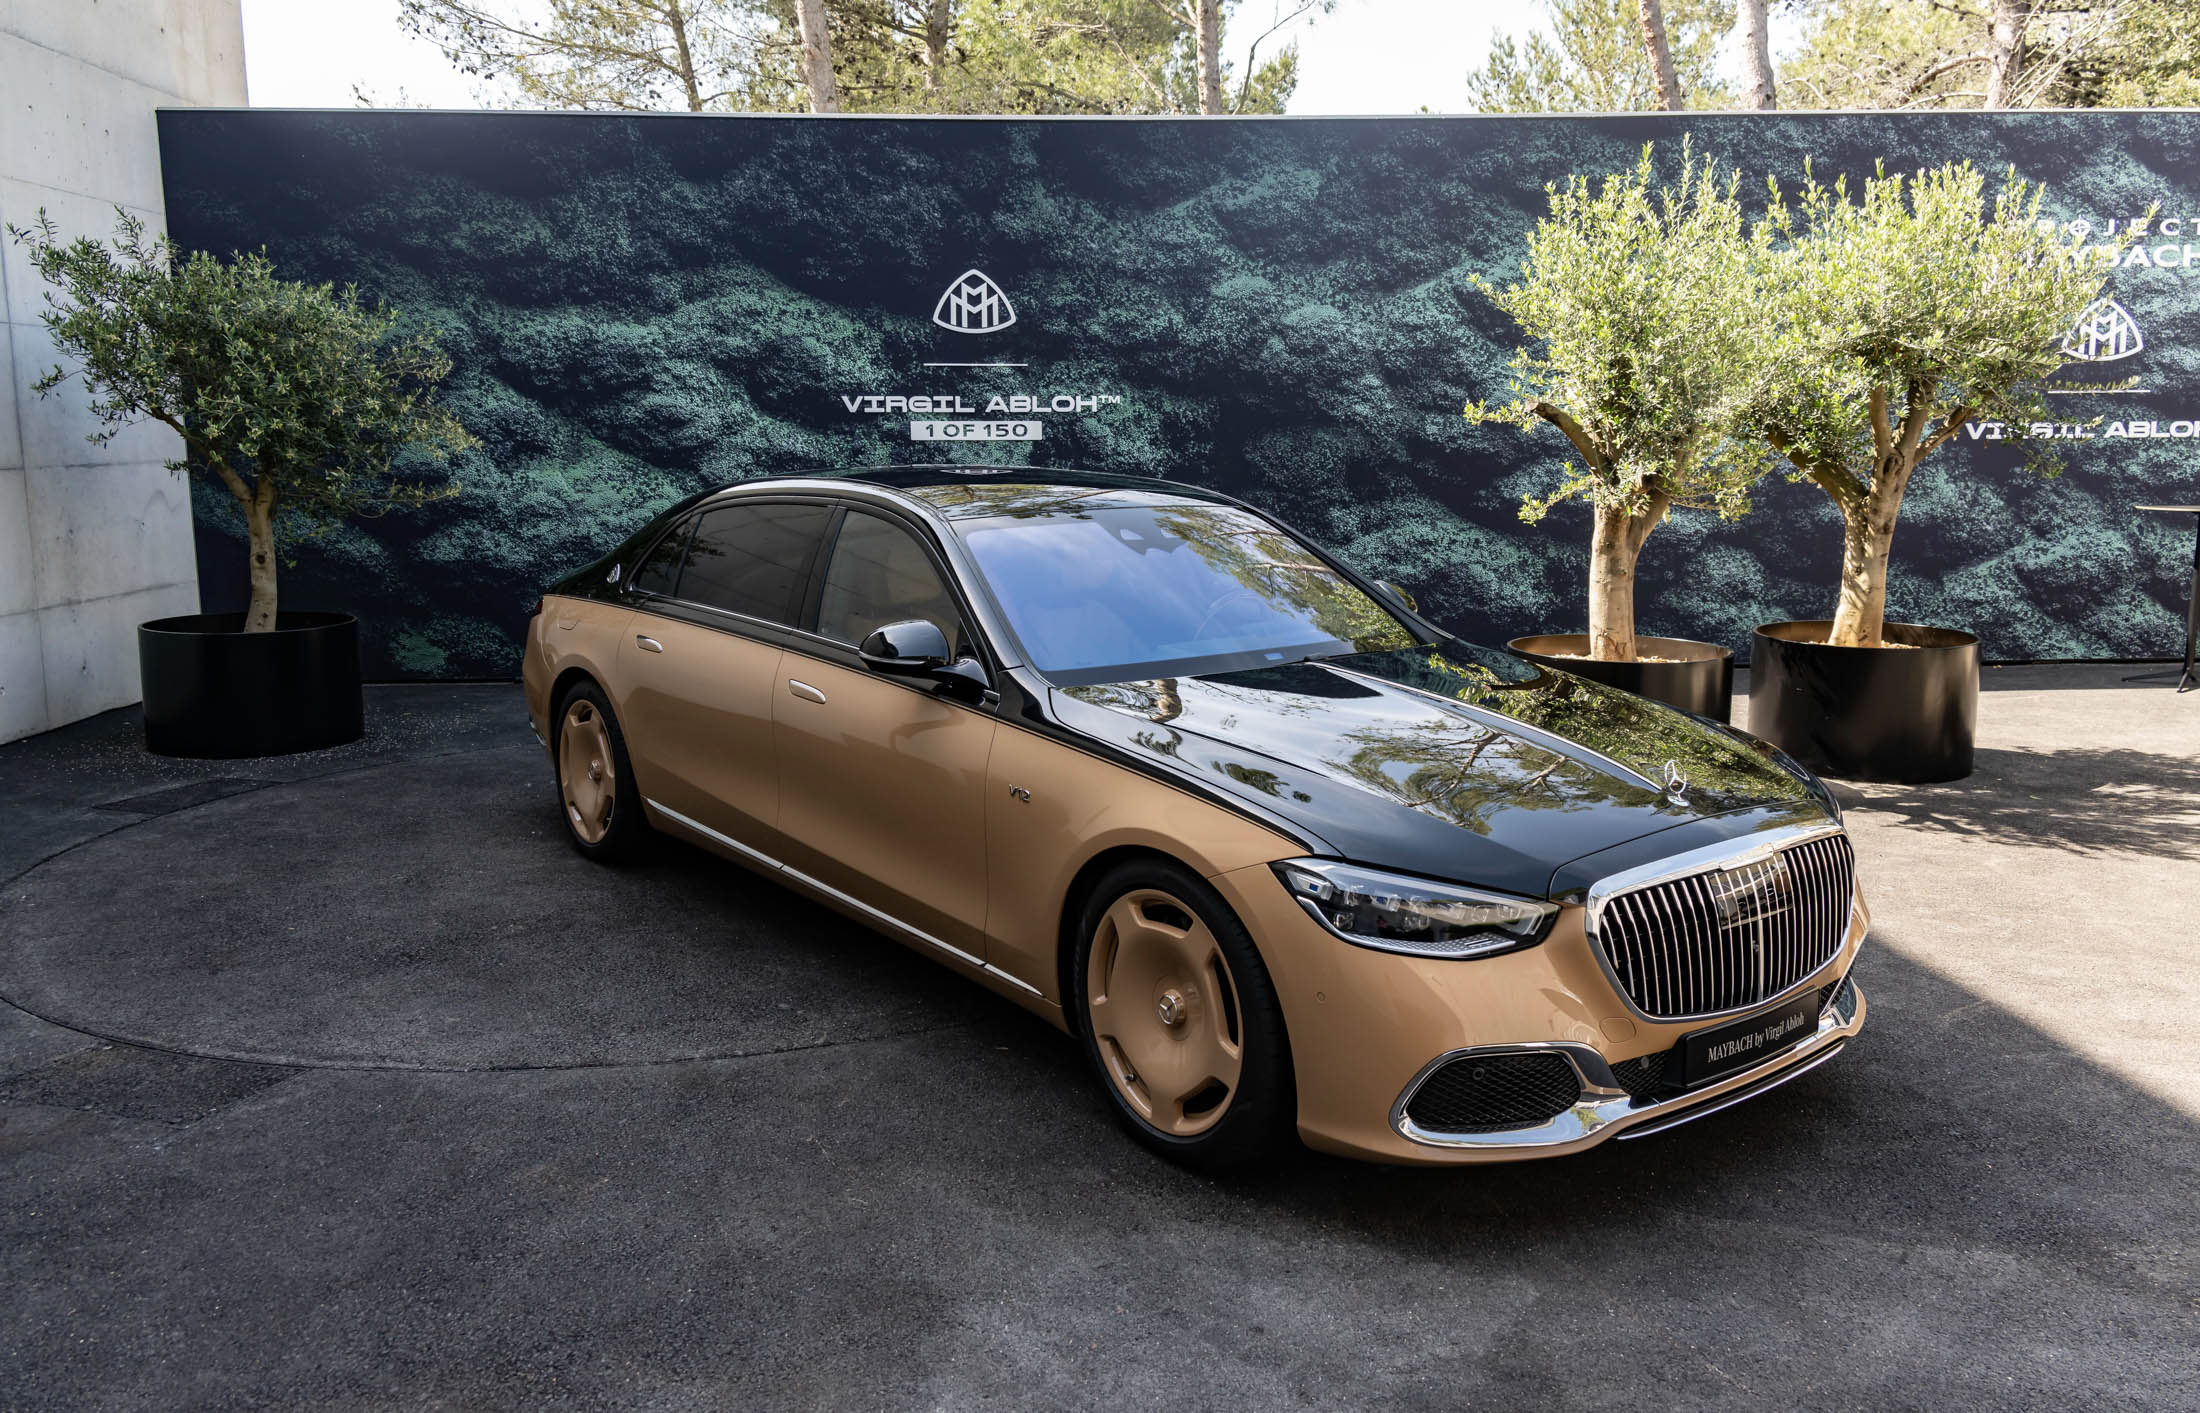 Virgil Abloh-designed project Maybach electric car unveiled by  Mercedes-Benz